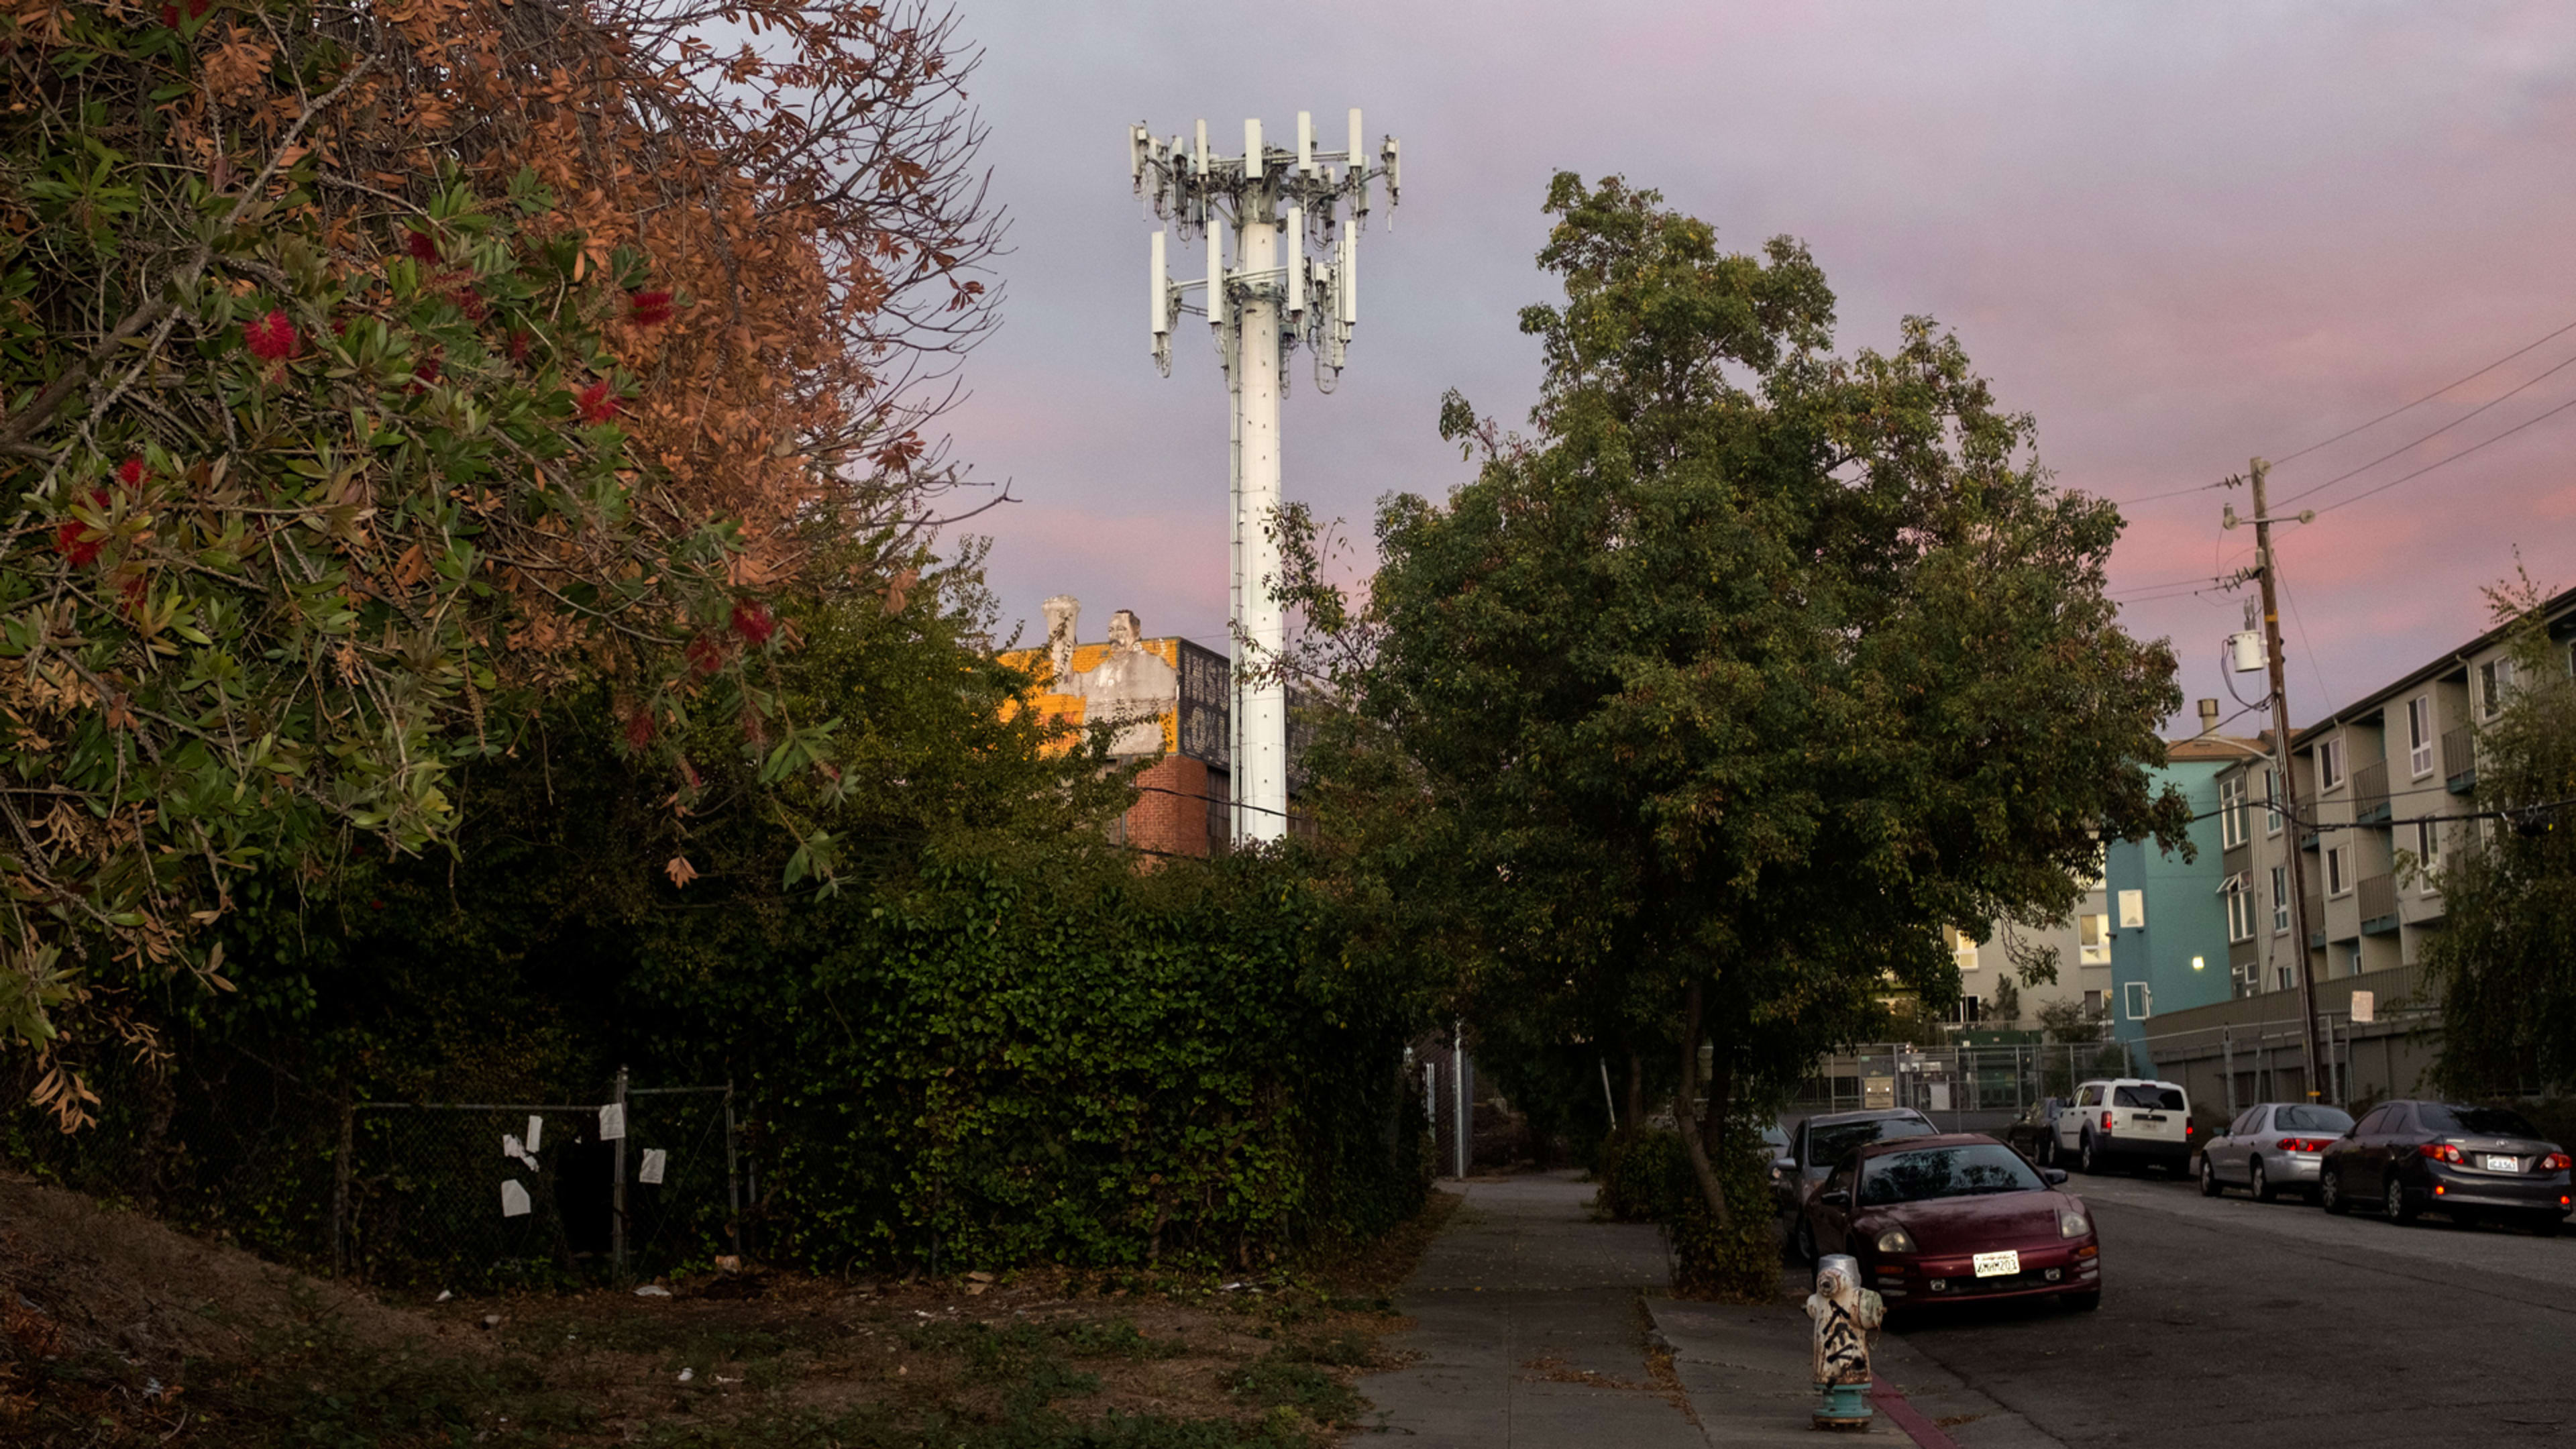 See How The Telecom Industry Is Quietly Changing The Shape Of Our Cities